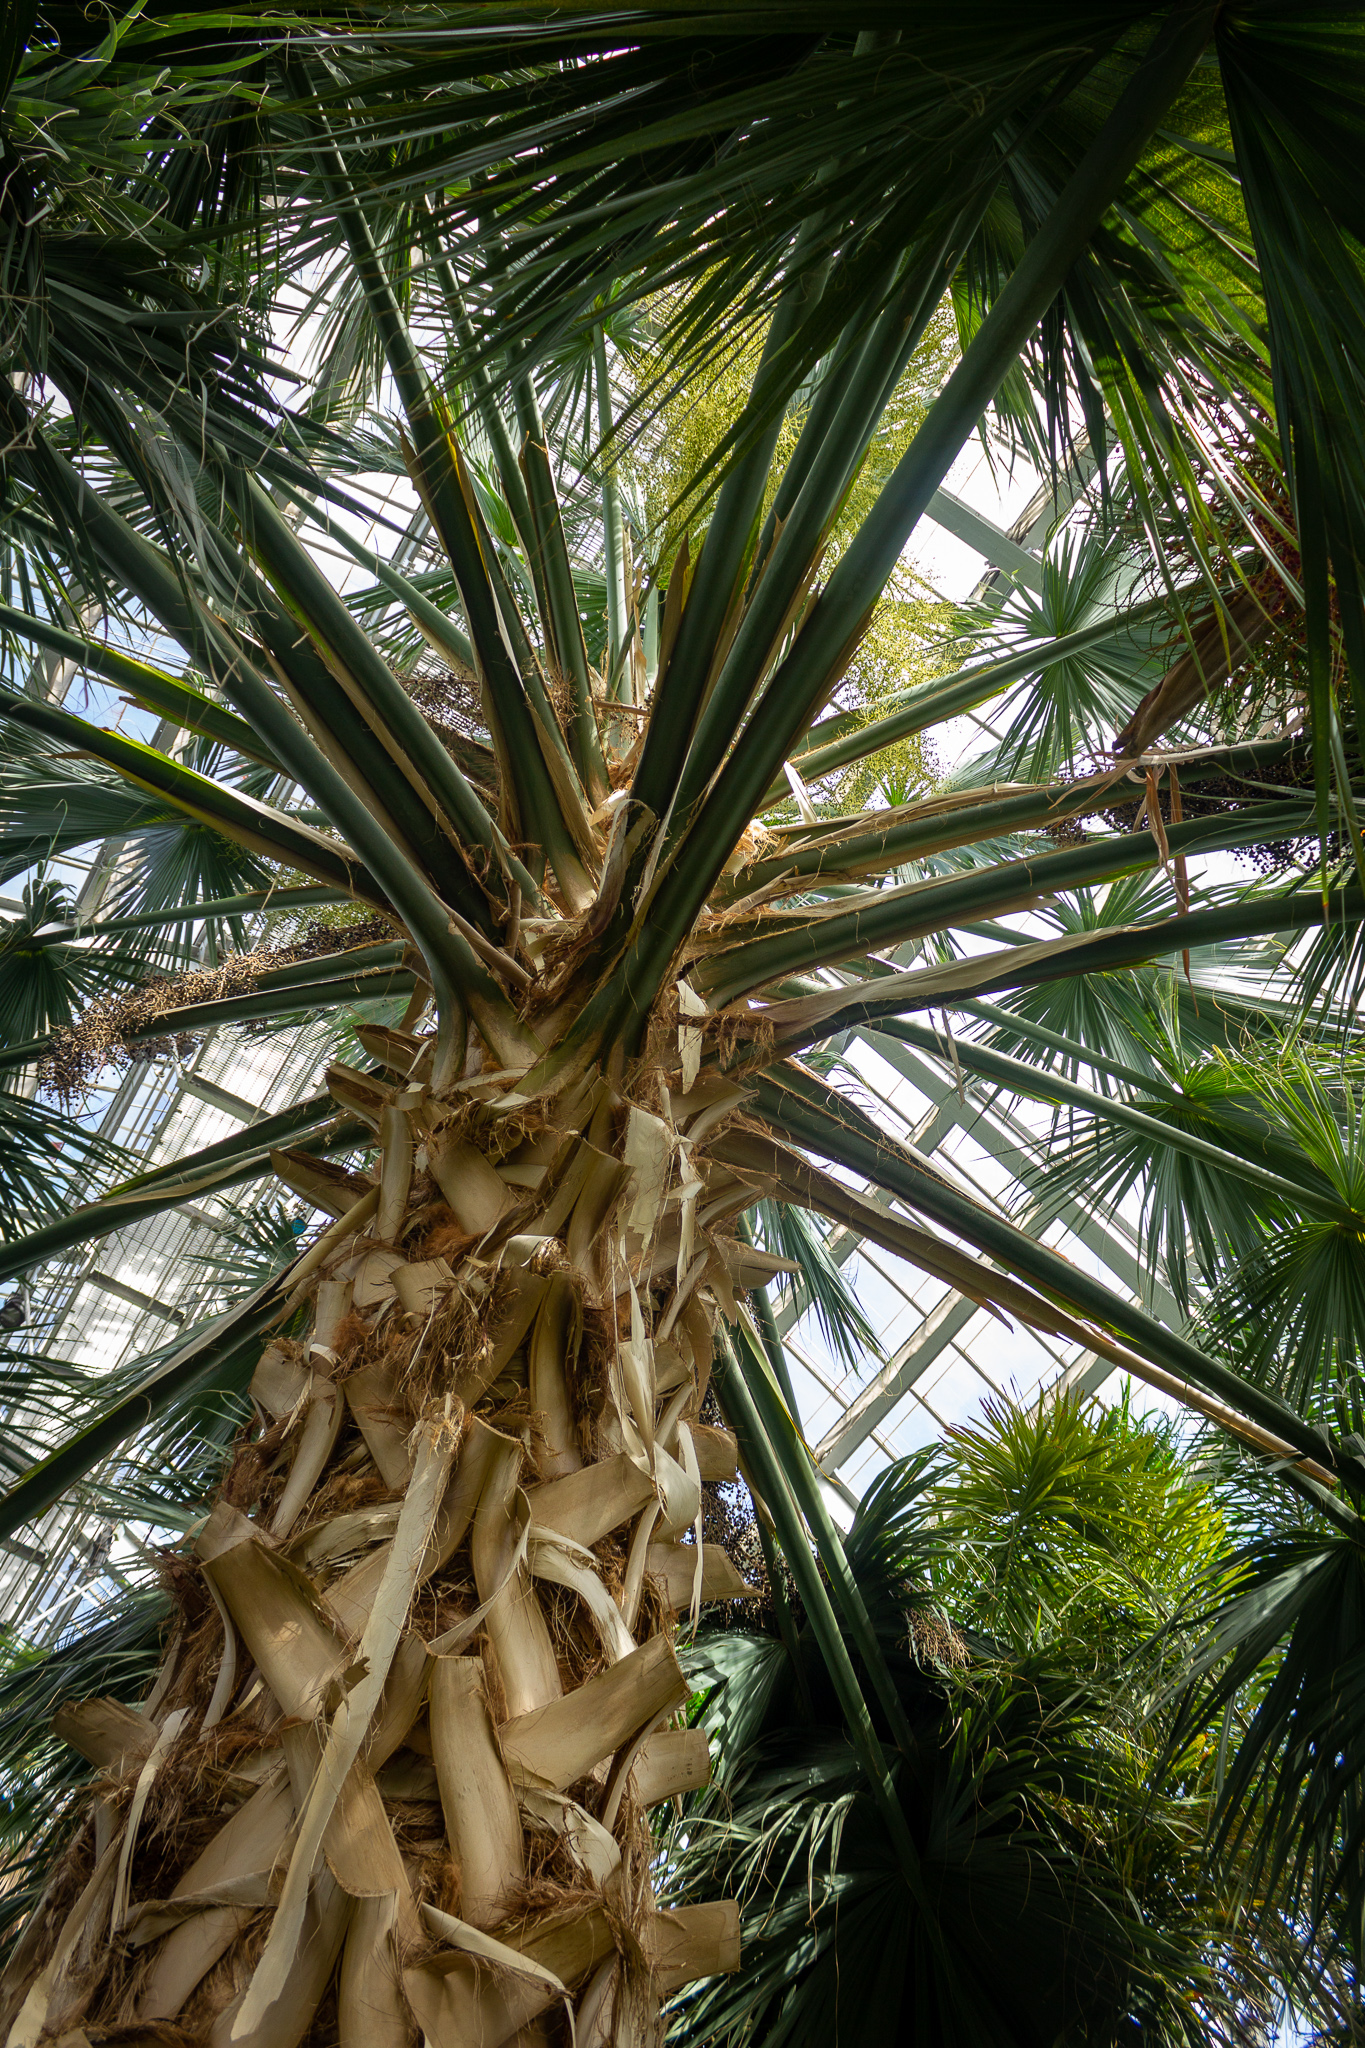 Looking up at the trunk and branching leaves of a tall palm tree